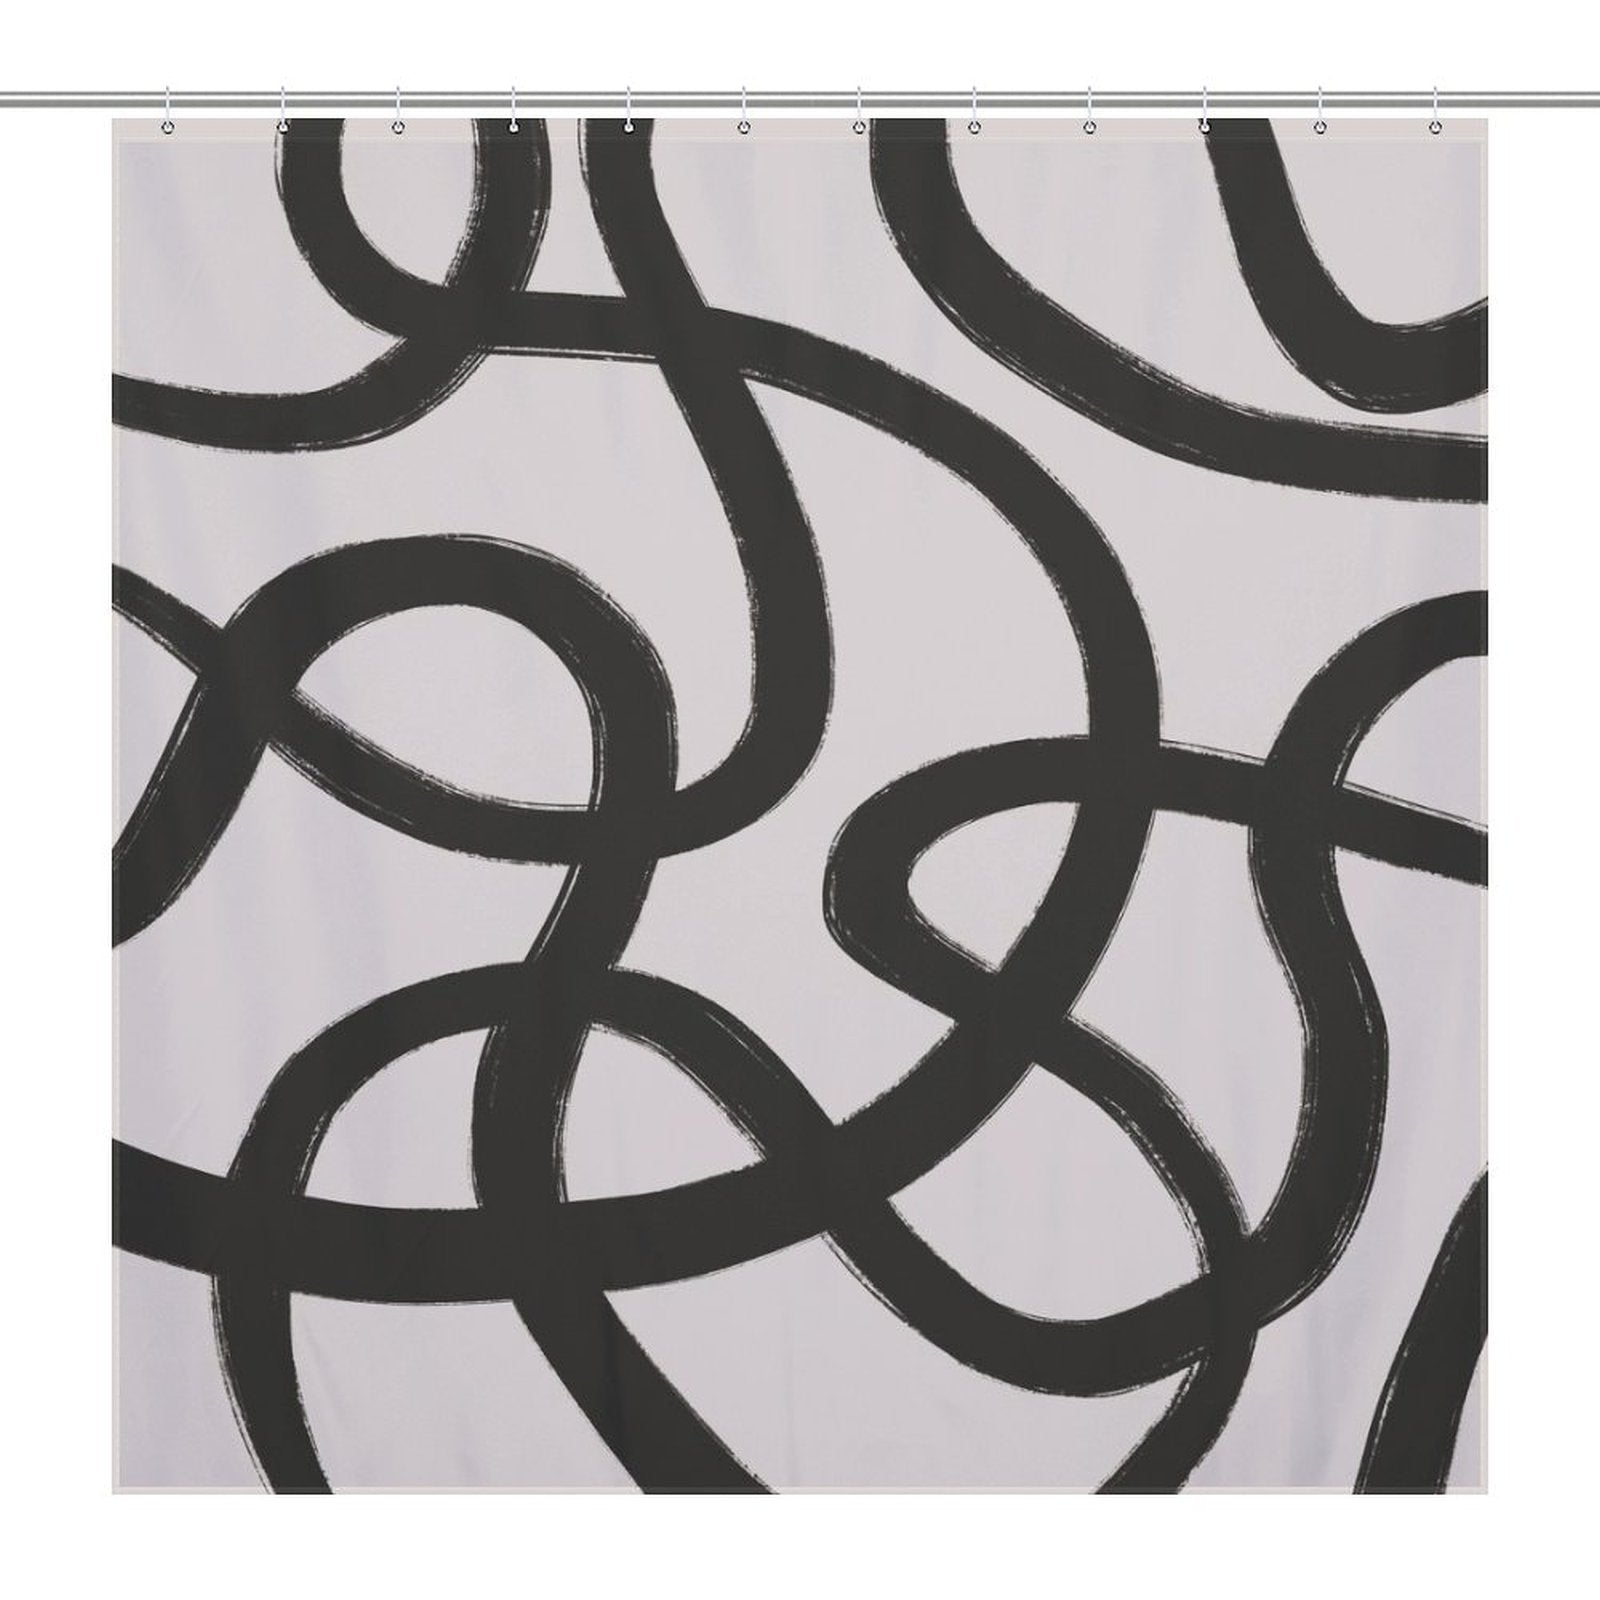 A Modern Geometric Art Minimalist Curve Black Line Black and Grey Abstract Shower Curtain-Cottoncat by Cotton Cat featuring a design of minimalist black curve lines gracefully forming bold, abstract loops on a white background.